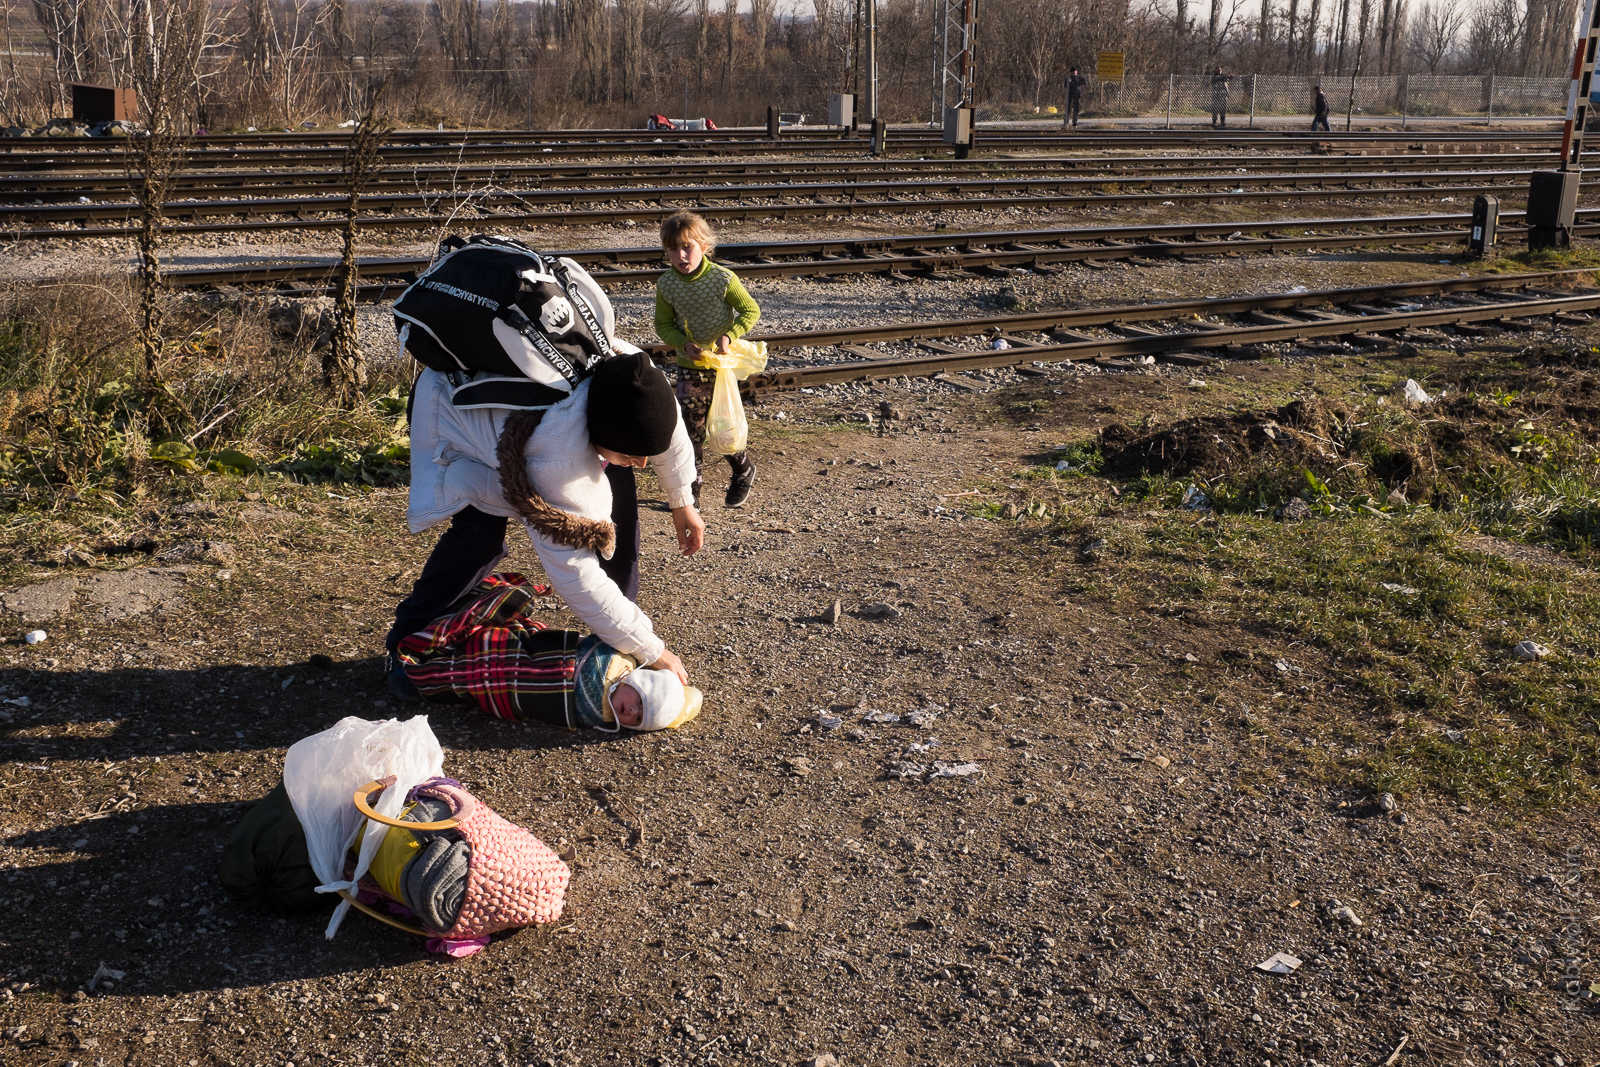 Syrian mother and daughters trying to cross the border from the Macedonia to Serbia